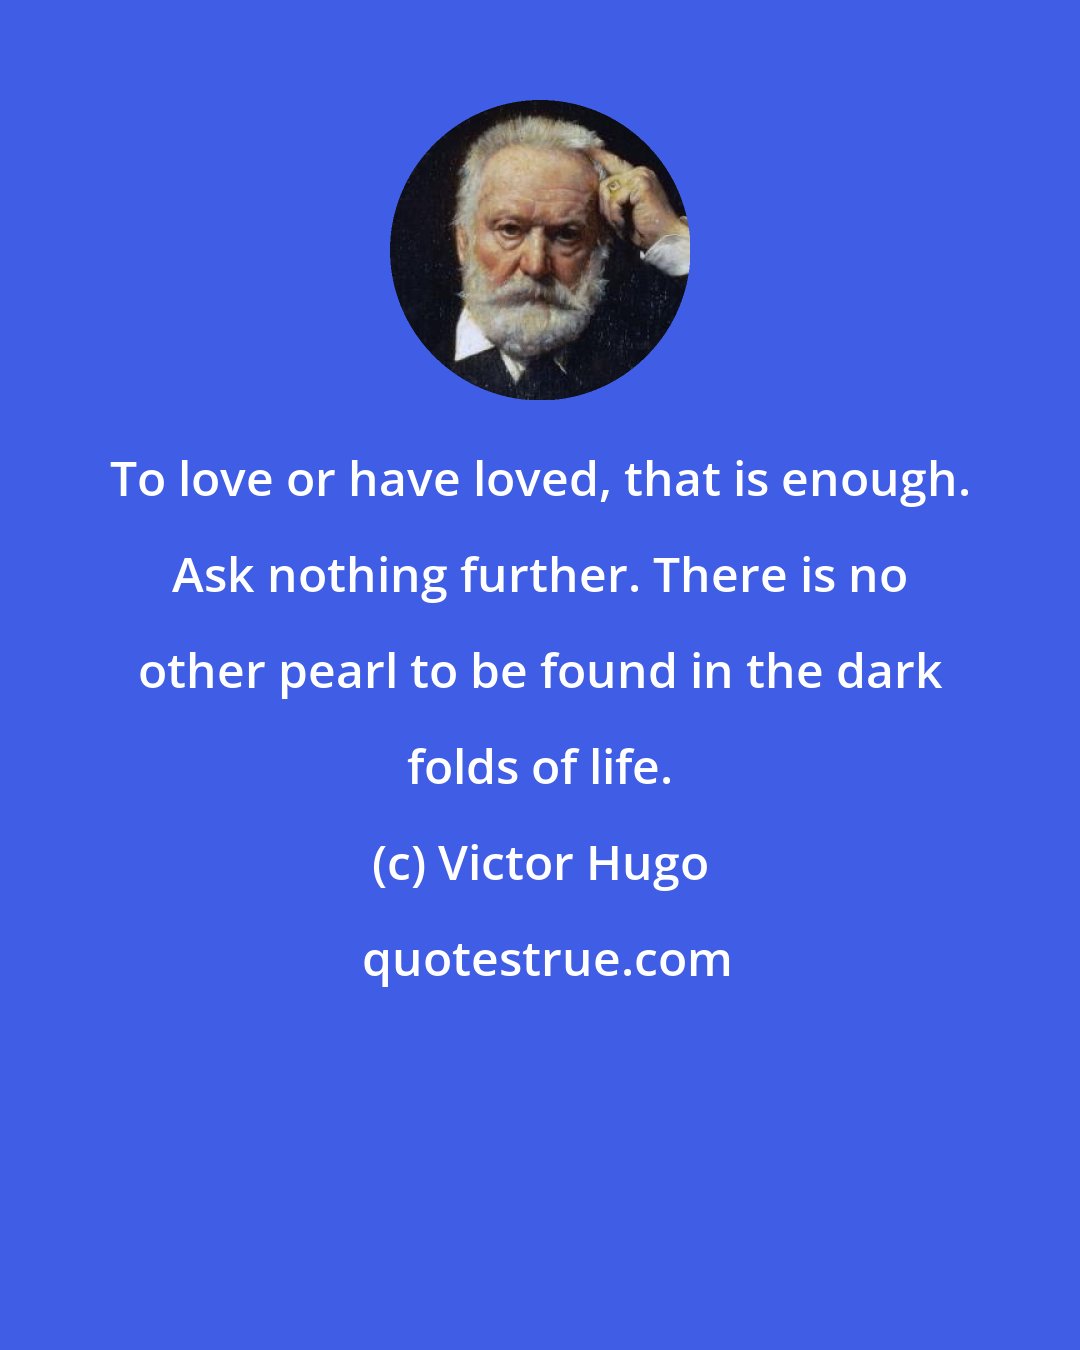 Victor Hugo: To love or have loved, that is enough. Ask nothing further. There is no other pearl to be found in the dark folds of life.